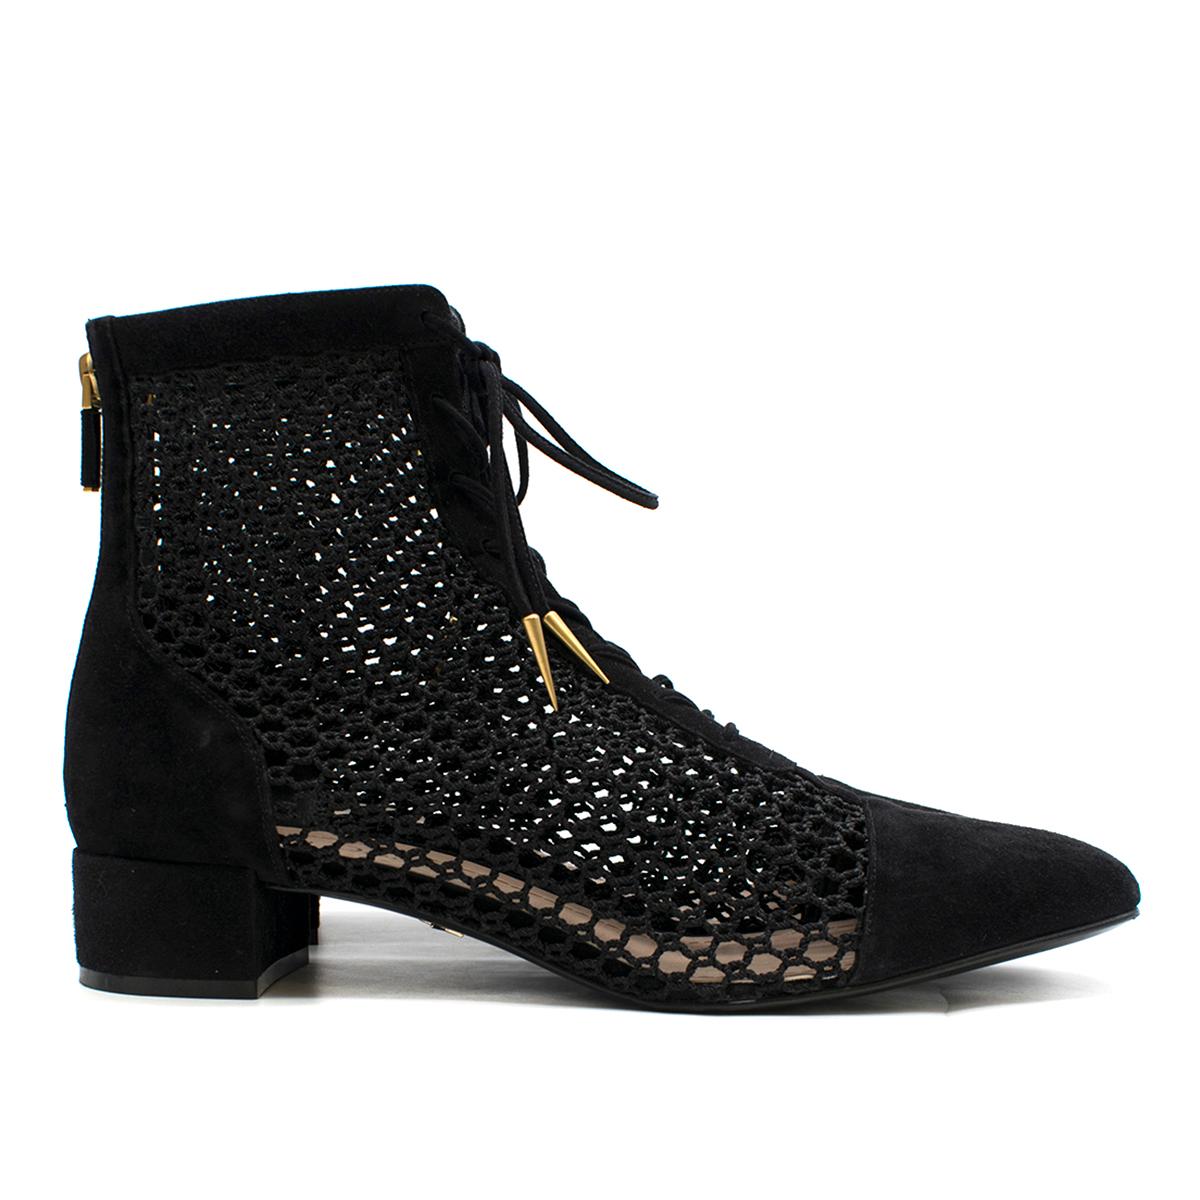 Dior Black Suede and Mesh Boots

-Black sheer mesh boots
-Suede toe cap and heel
-Lace up detailing
-Back zip closure
-Square toe

Please note, these items are pre-owned and may show signs of being stored even when unworn and unused. This is